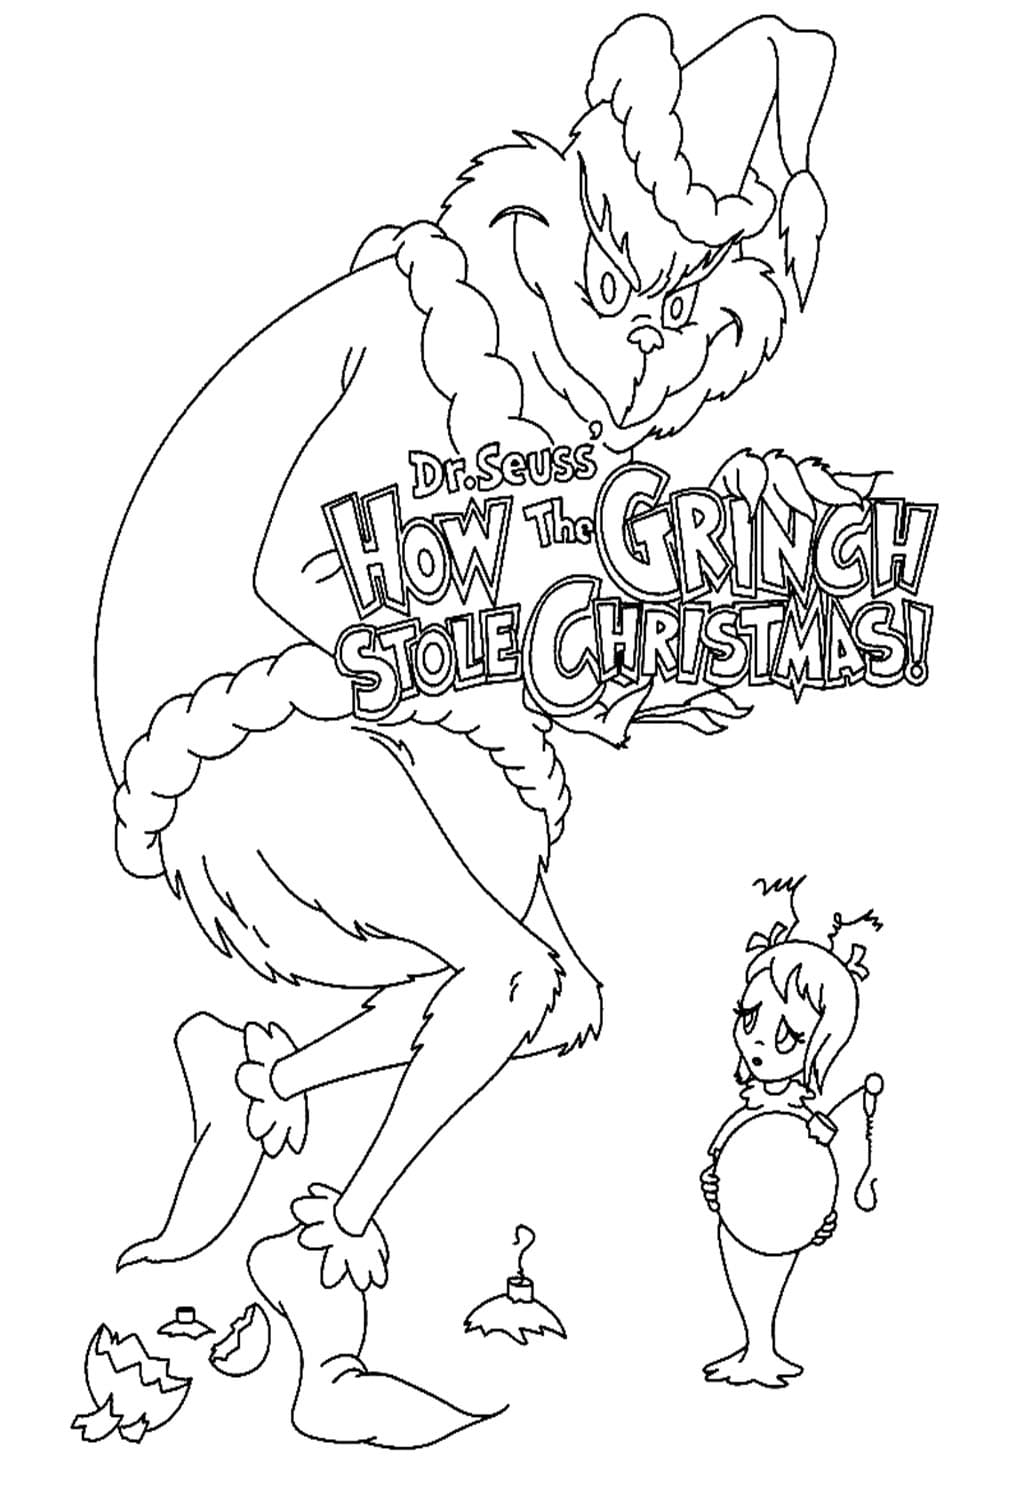 The Grinch Stole Christmas Poster Coloring Page - Free Printable ...